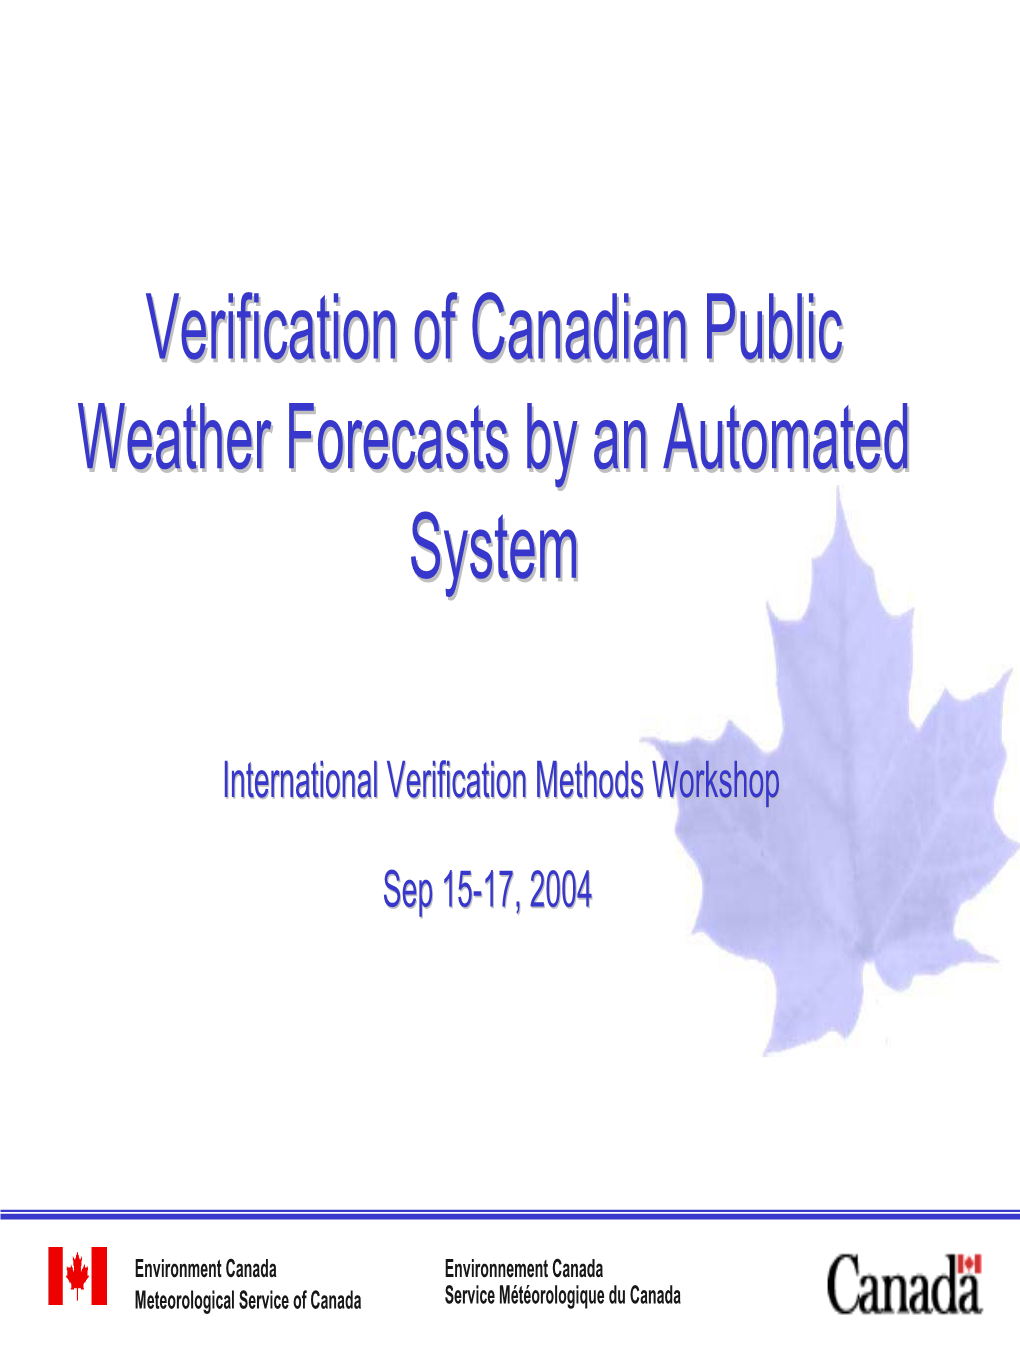 Verification of Canadian Public Weather Forecasts by An